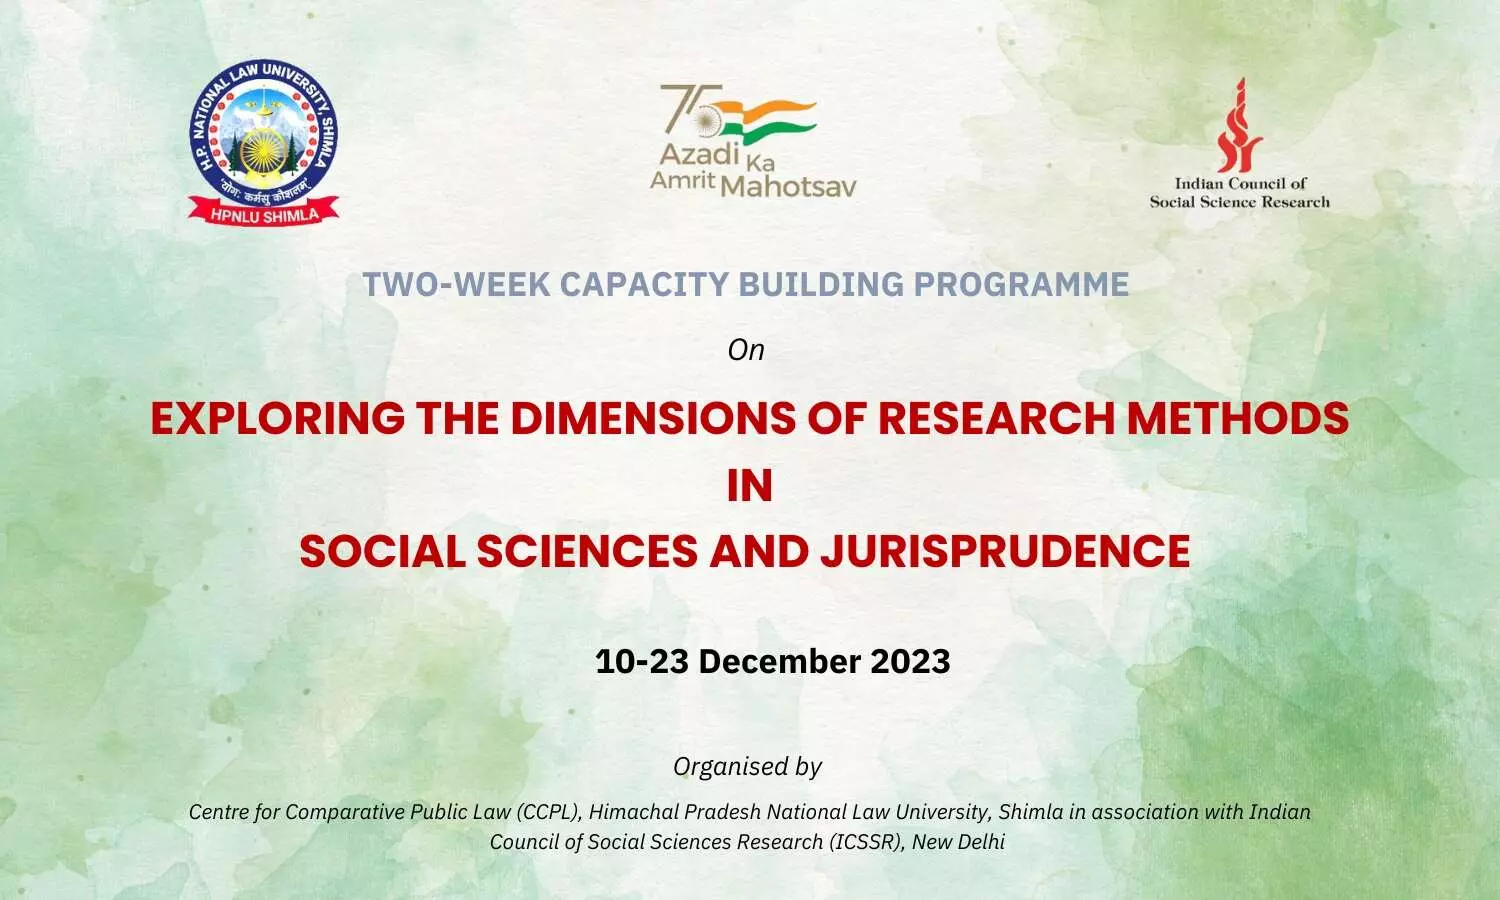 Capacity Building Programme on Exploring the Dimensions of Research Methods | HPNLU Shimla